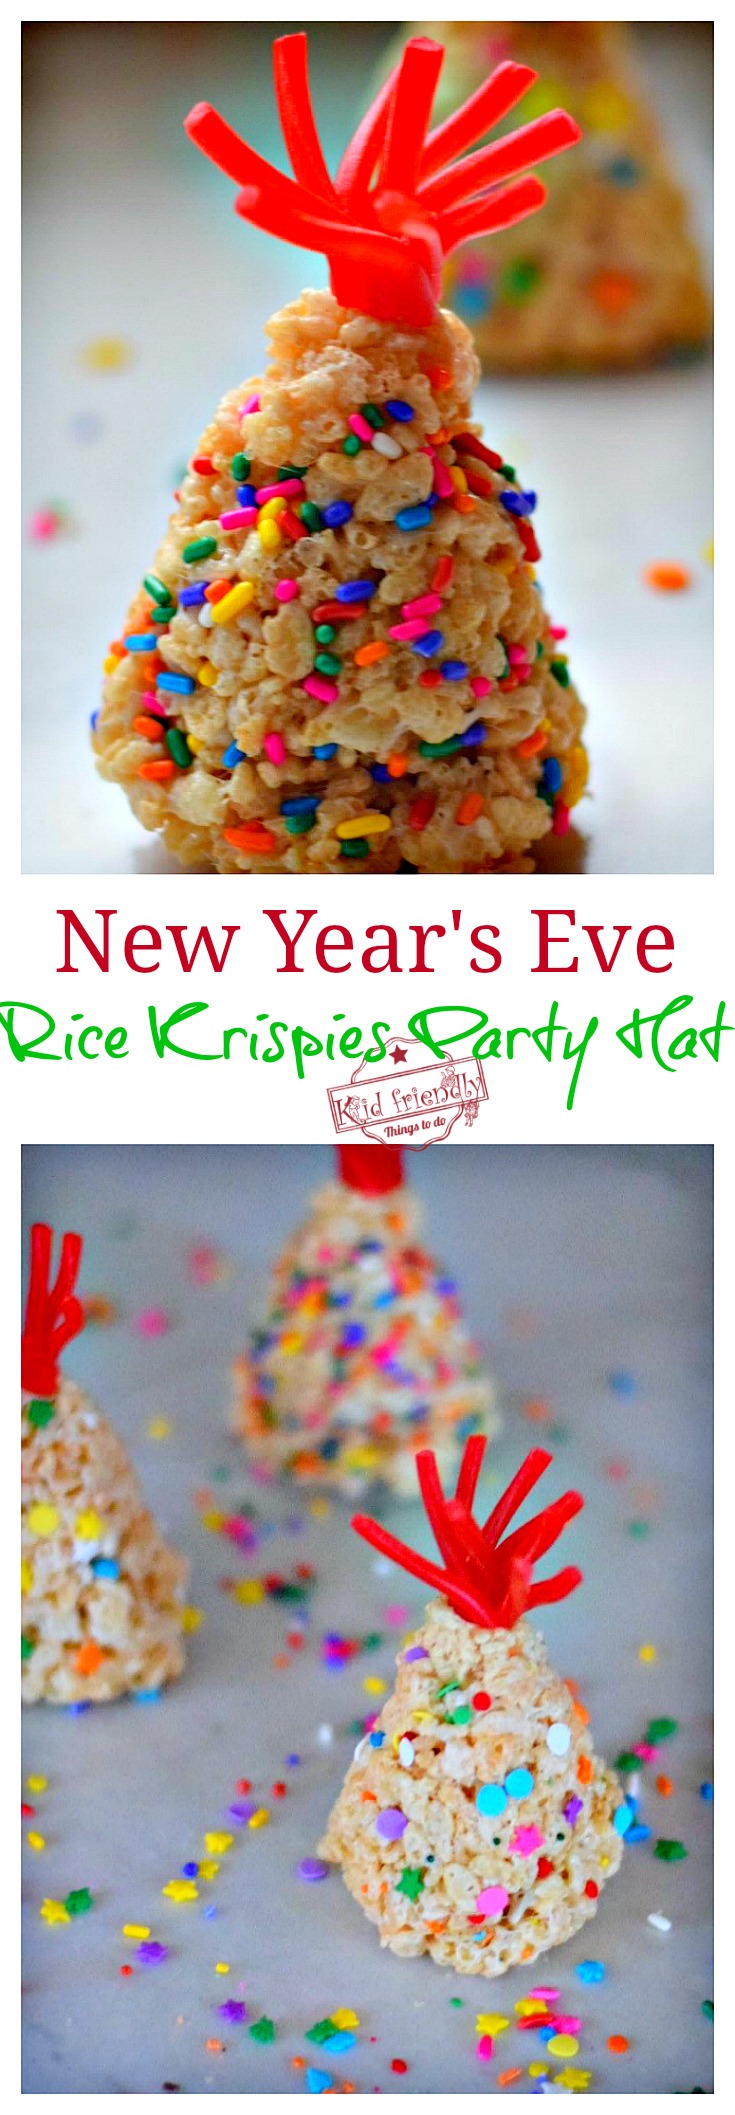 New Year's Eve Rice Krispies Treat Party Hats for a Fun Kid Friendly Treat - Ring in the New Year with these yummy treats - www.kidfriendlythingstodo.com